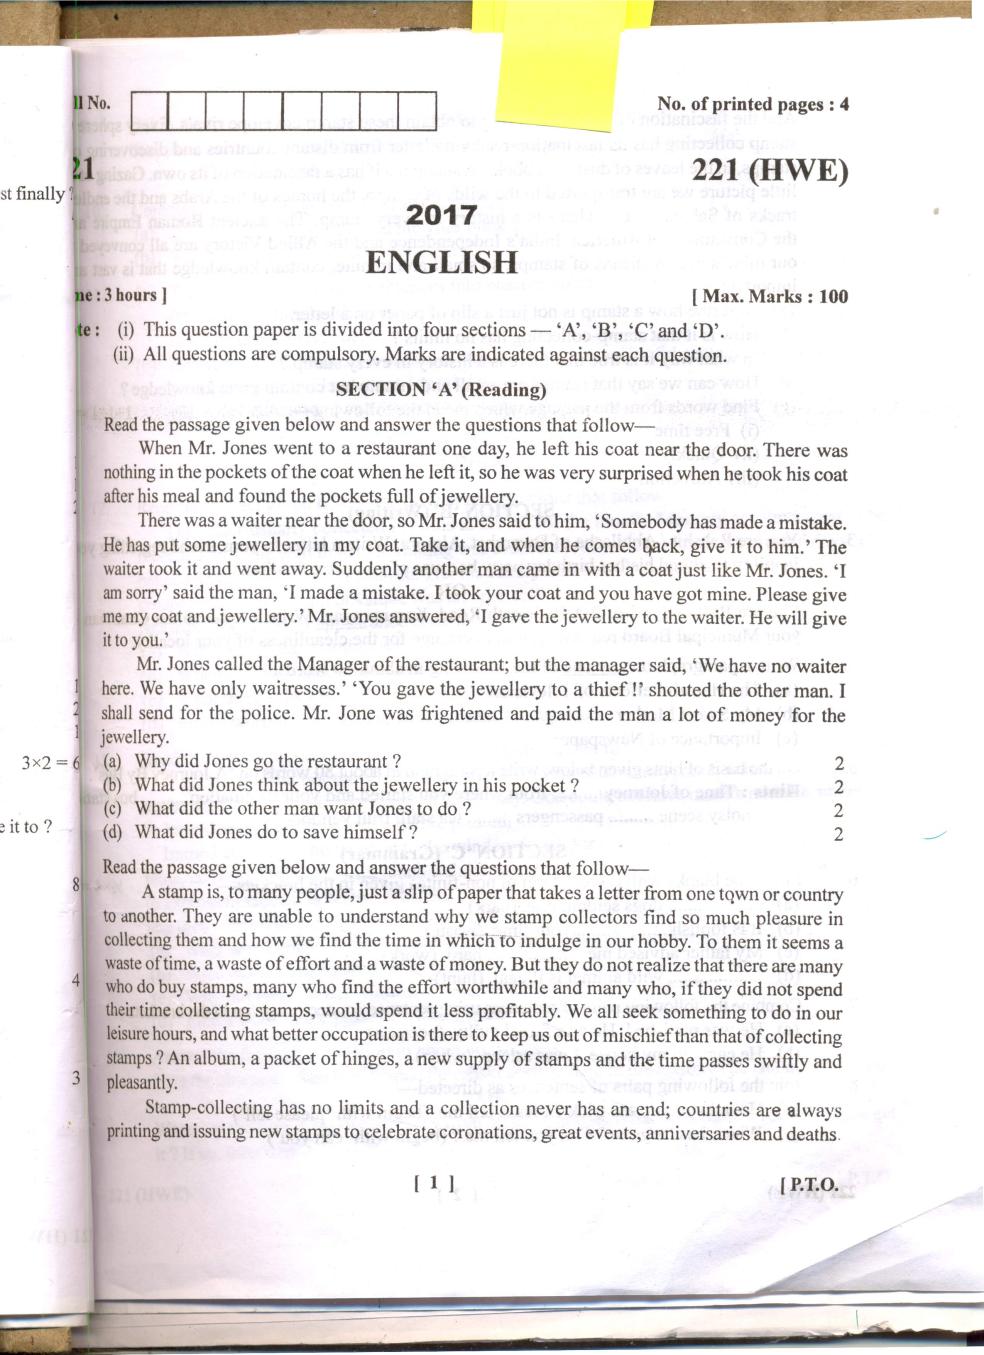 Uttarakhand Board Class 10 Question Paper 2017 for English - Page 1